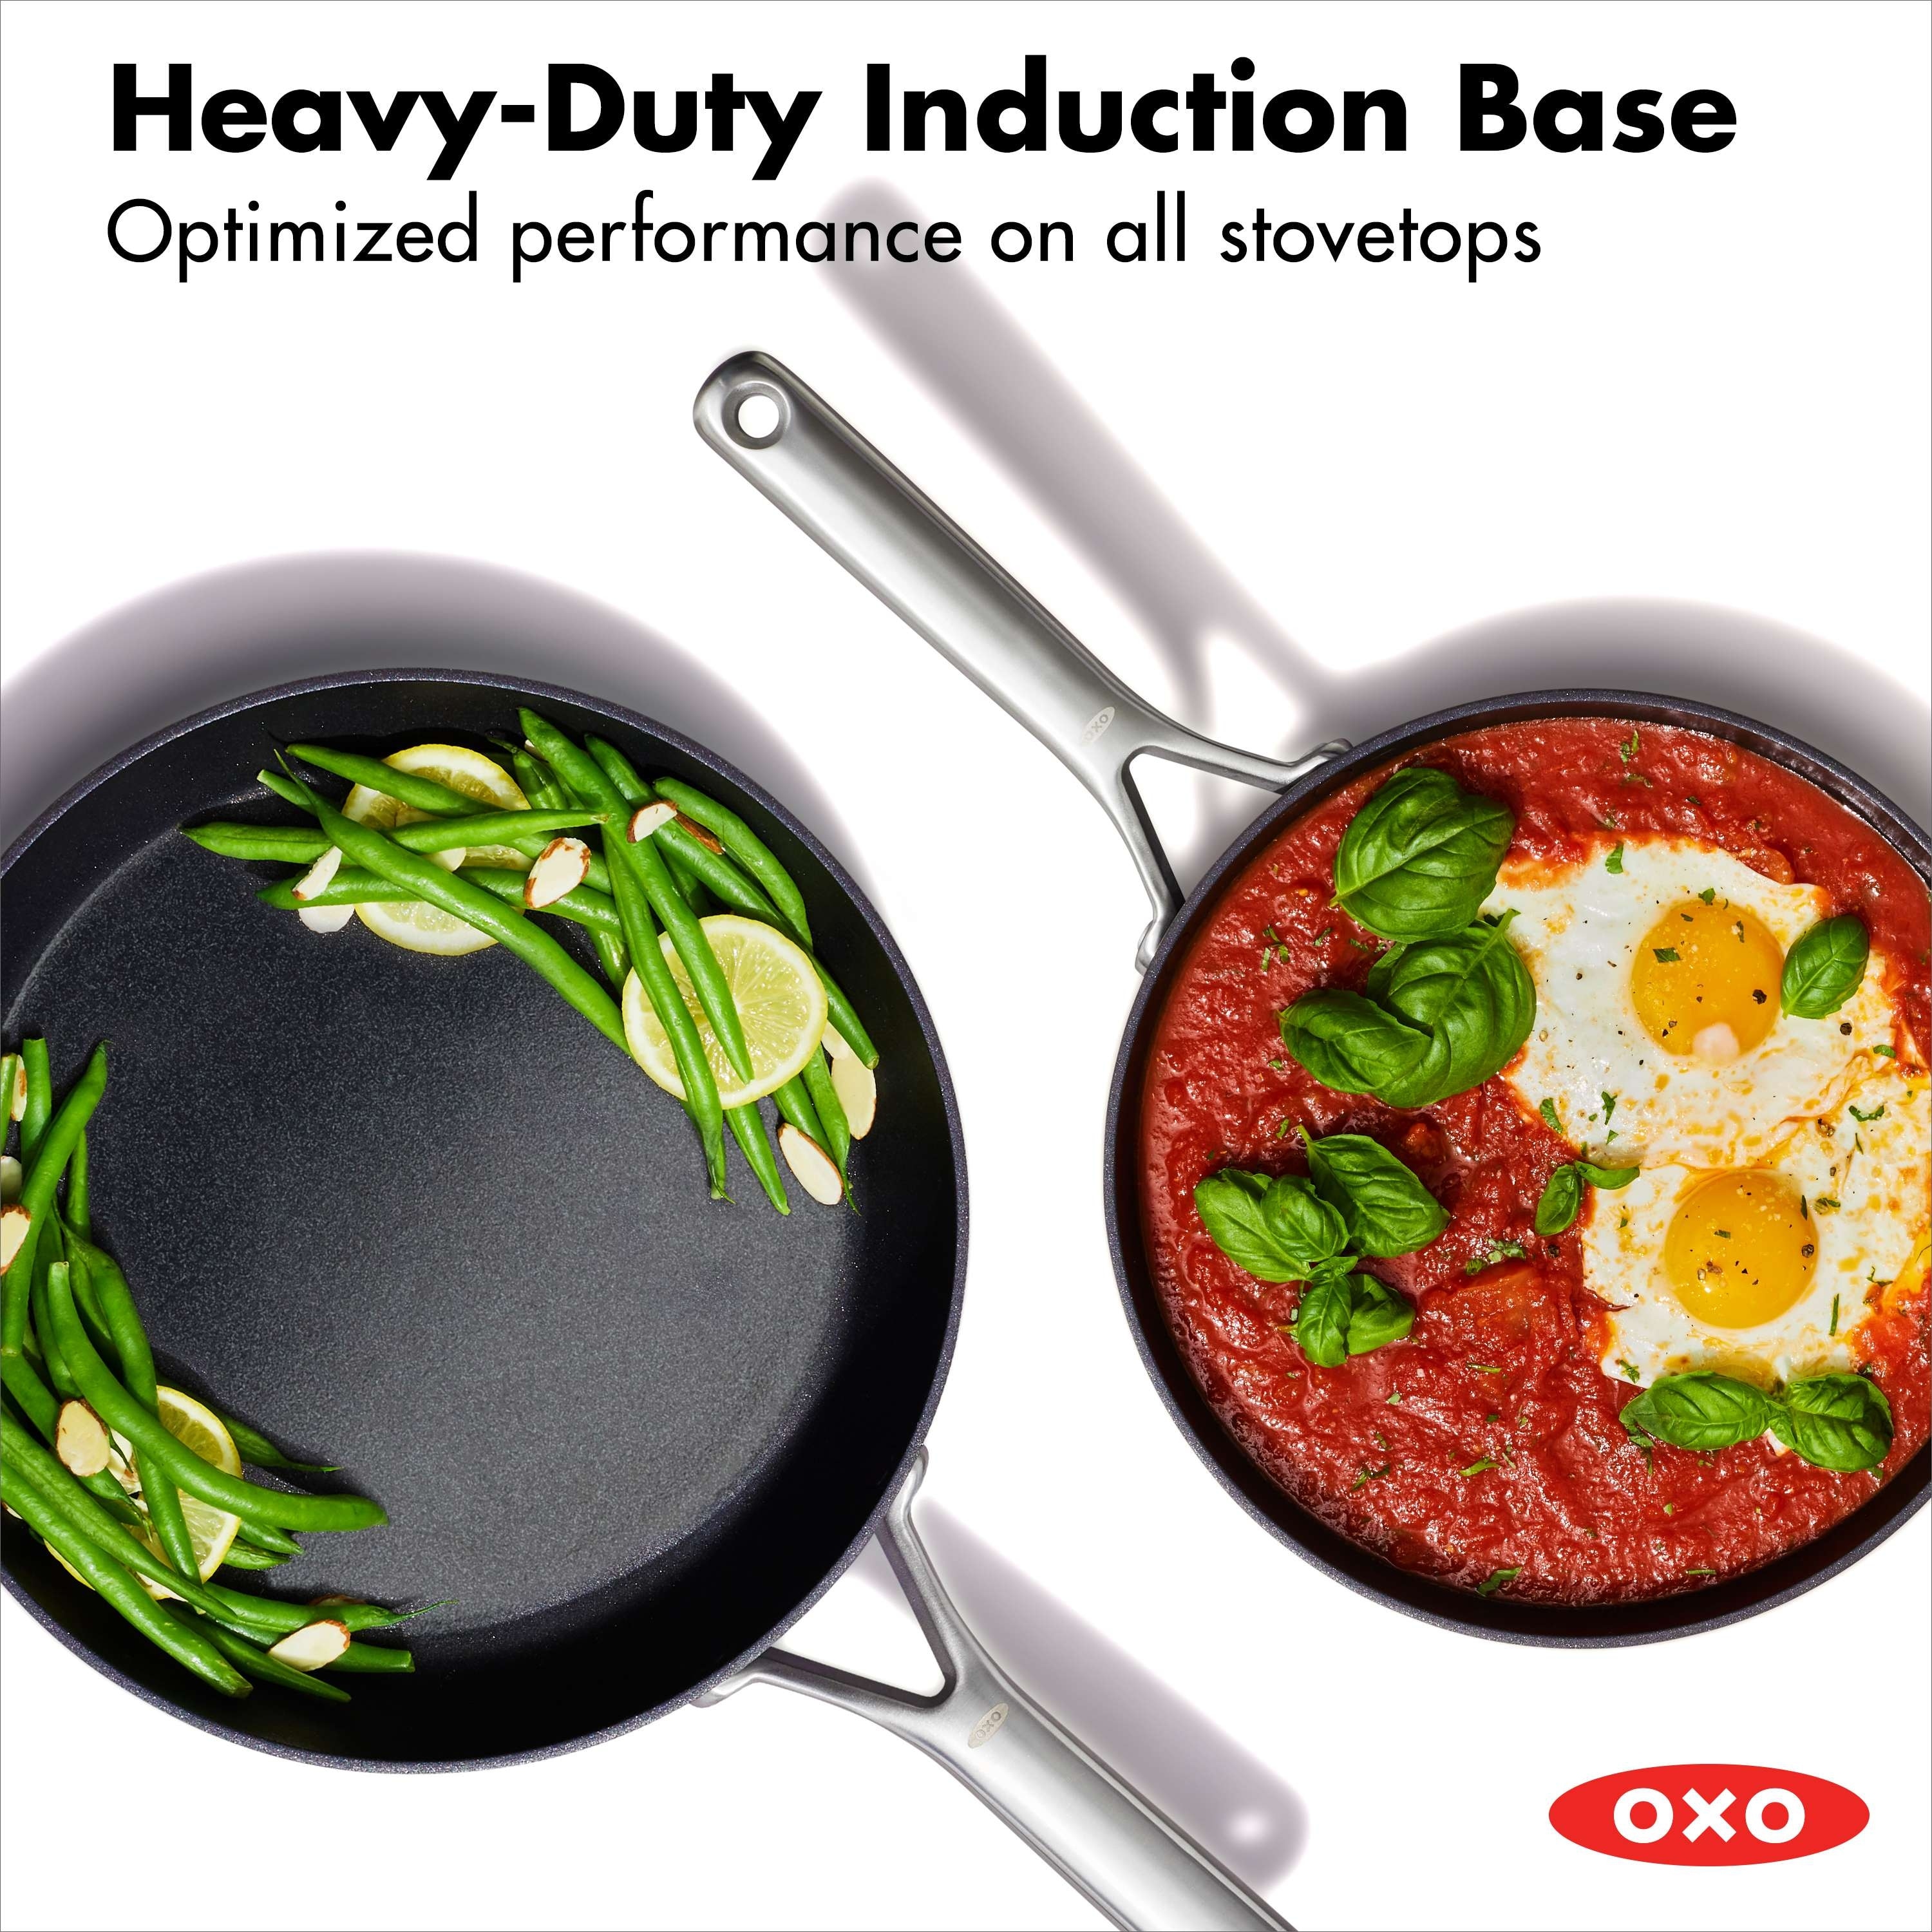 https://ak1.ostkcdn.com/images/products/is/images/direct/f100de44989cc43d606db37d51381e129fe2993b/OXO-Professional-Ceramic-Non-Stick-2-Piece-Frying-Pan-Set%2C-8-In-and-10-In.jpg